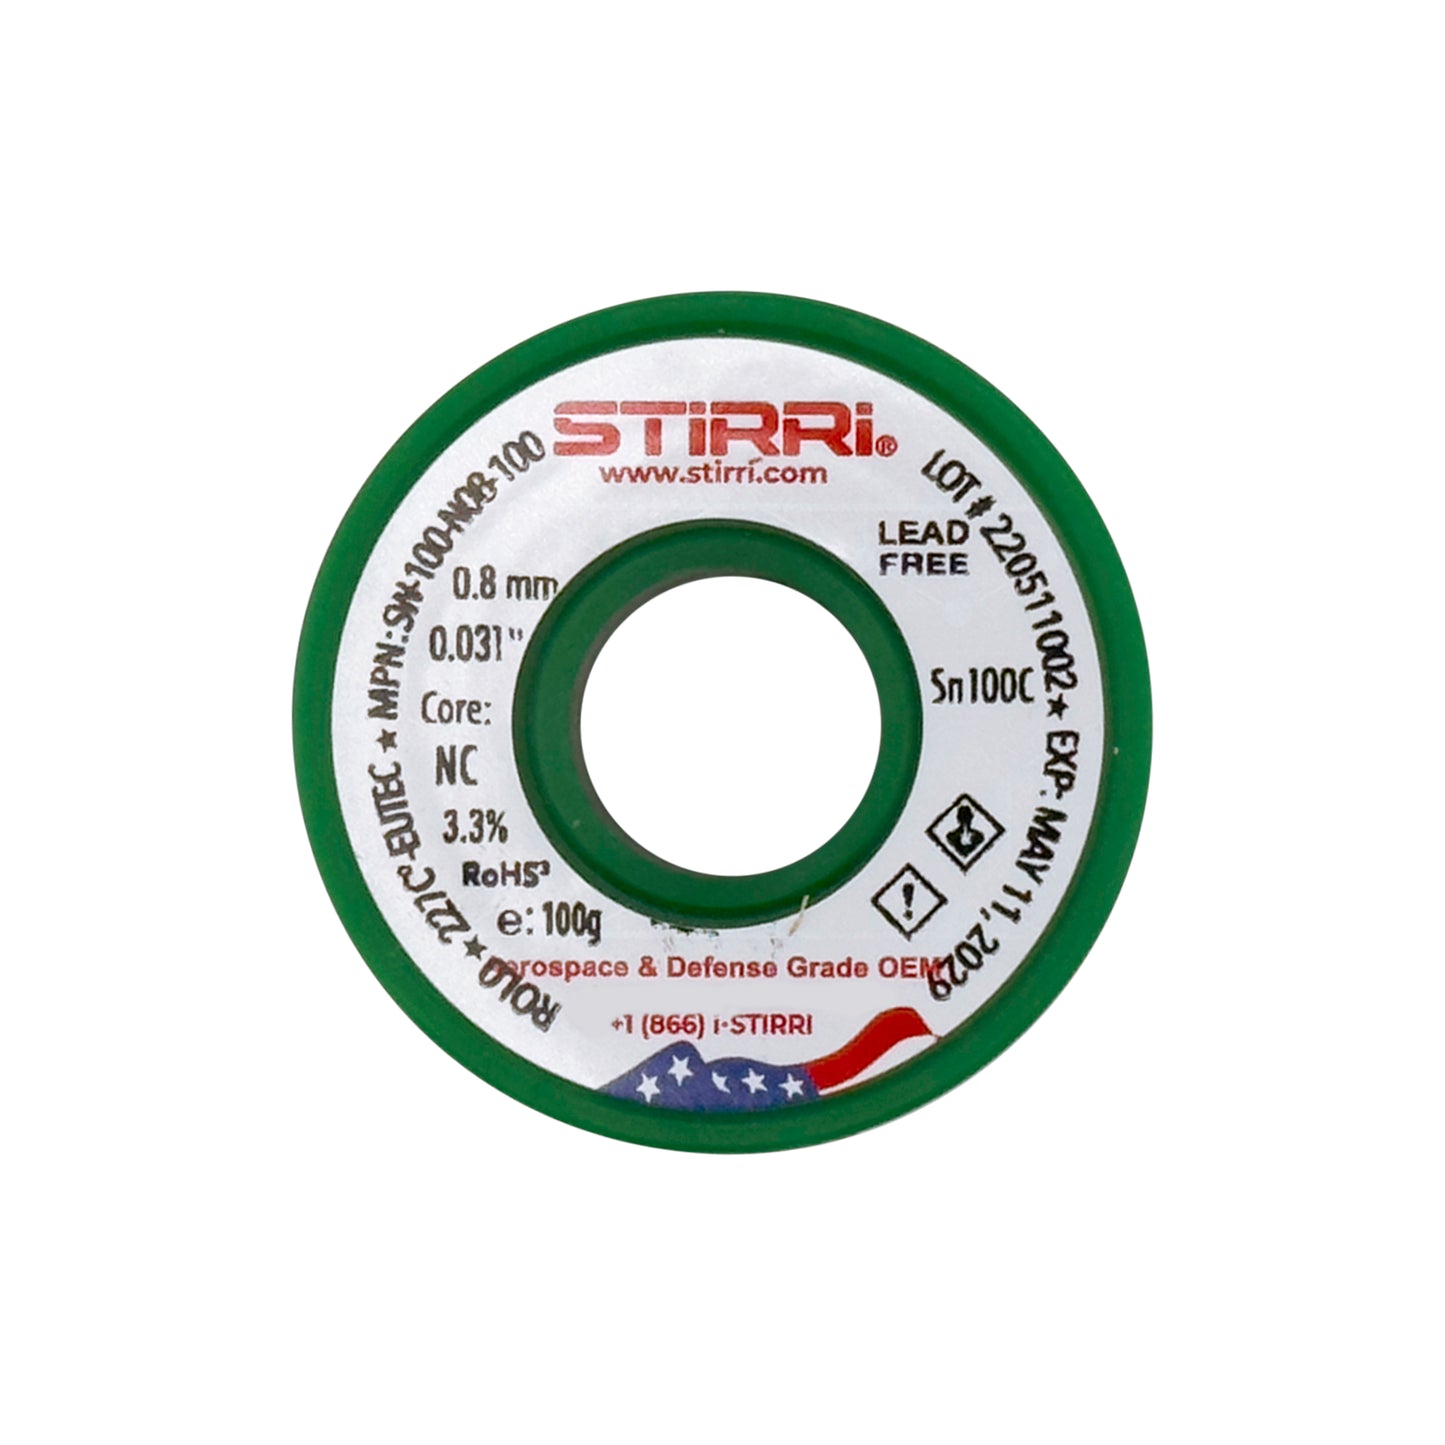 LF-100 Sn100c lead-free selective solder wire NC-core ROL0 - 100g spool